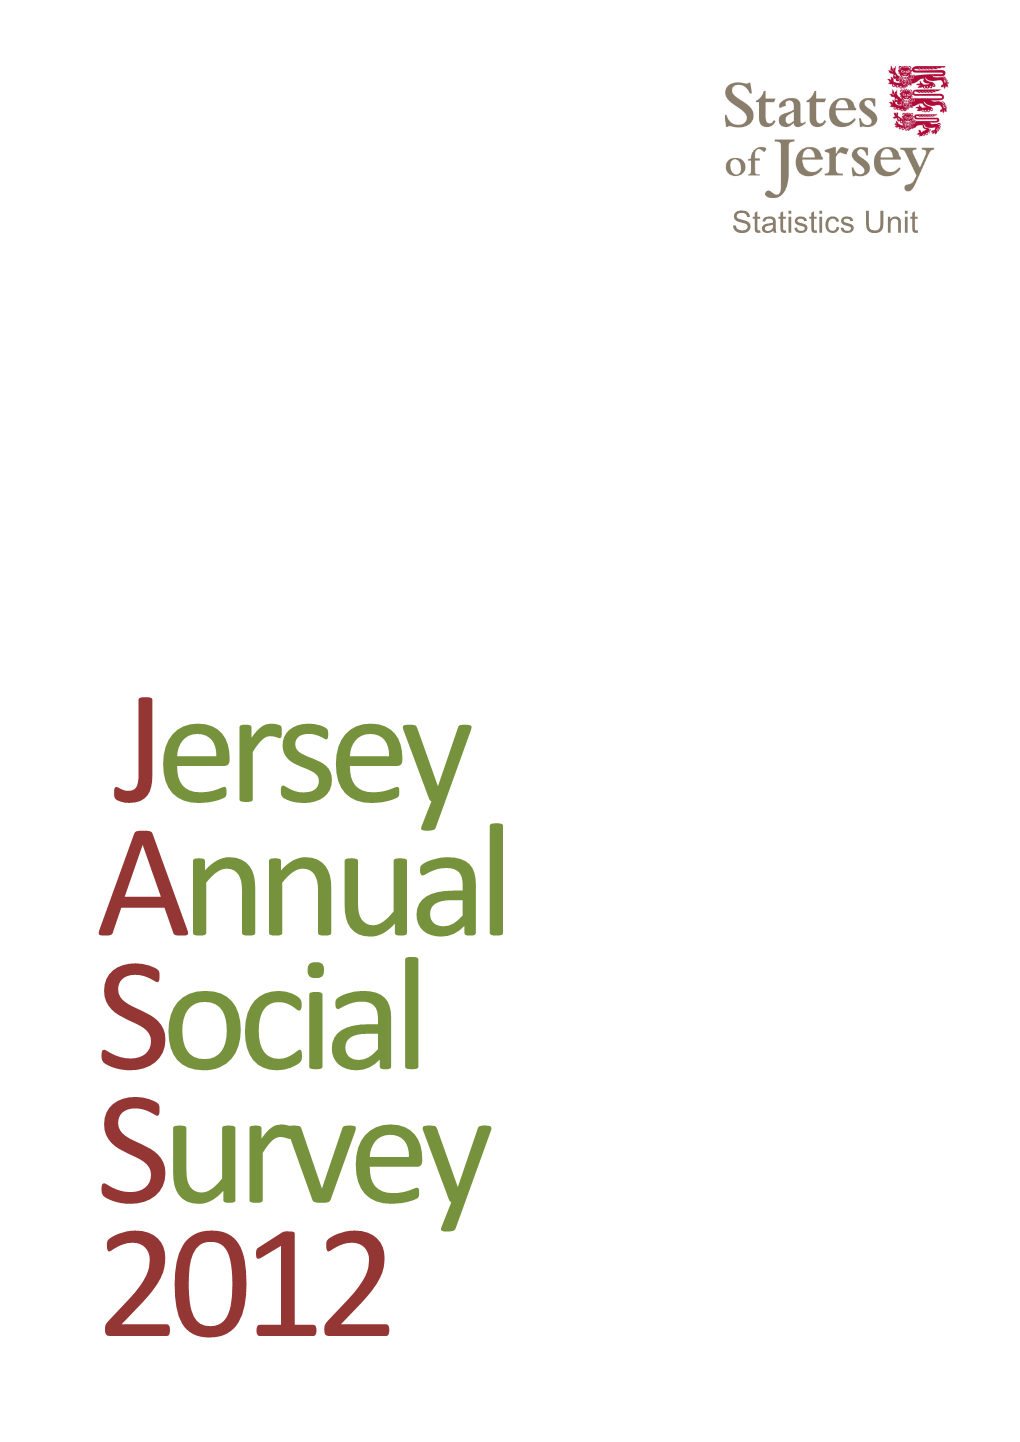 Download Jersey Annual Social Survey Report 2012